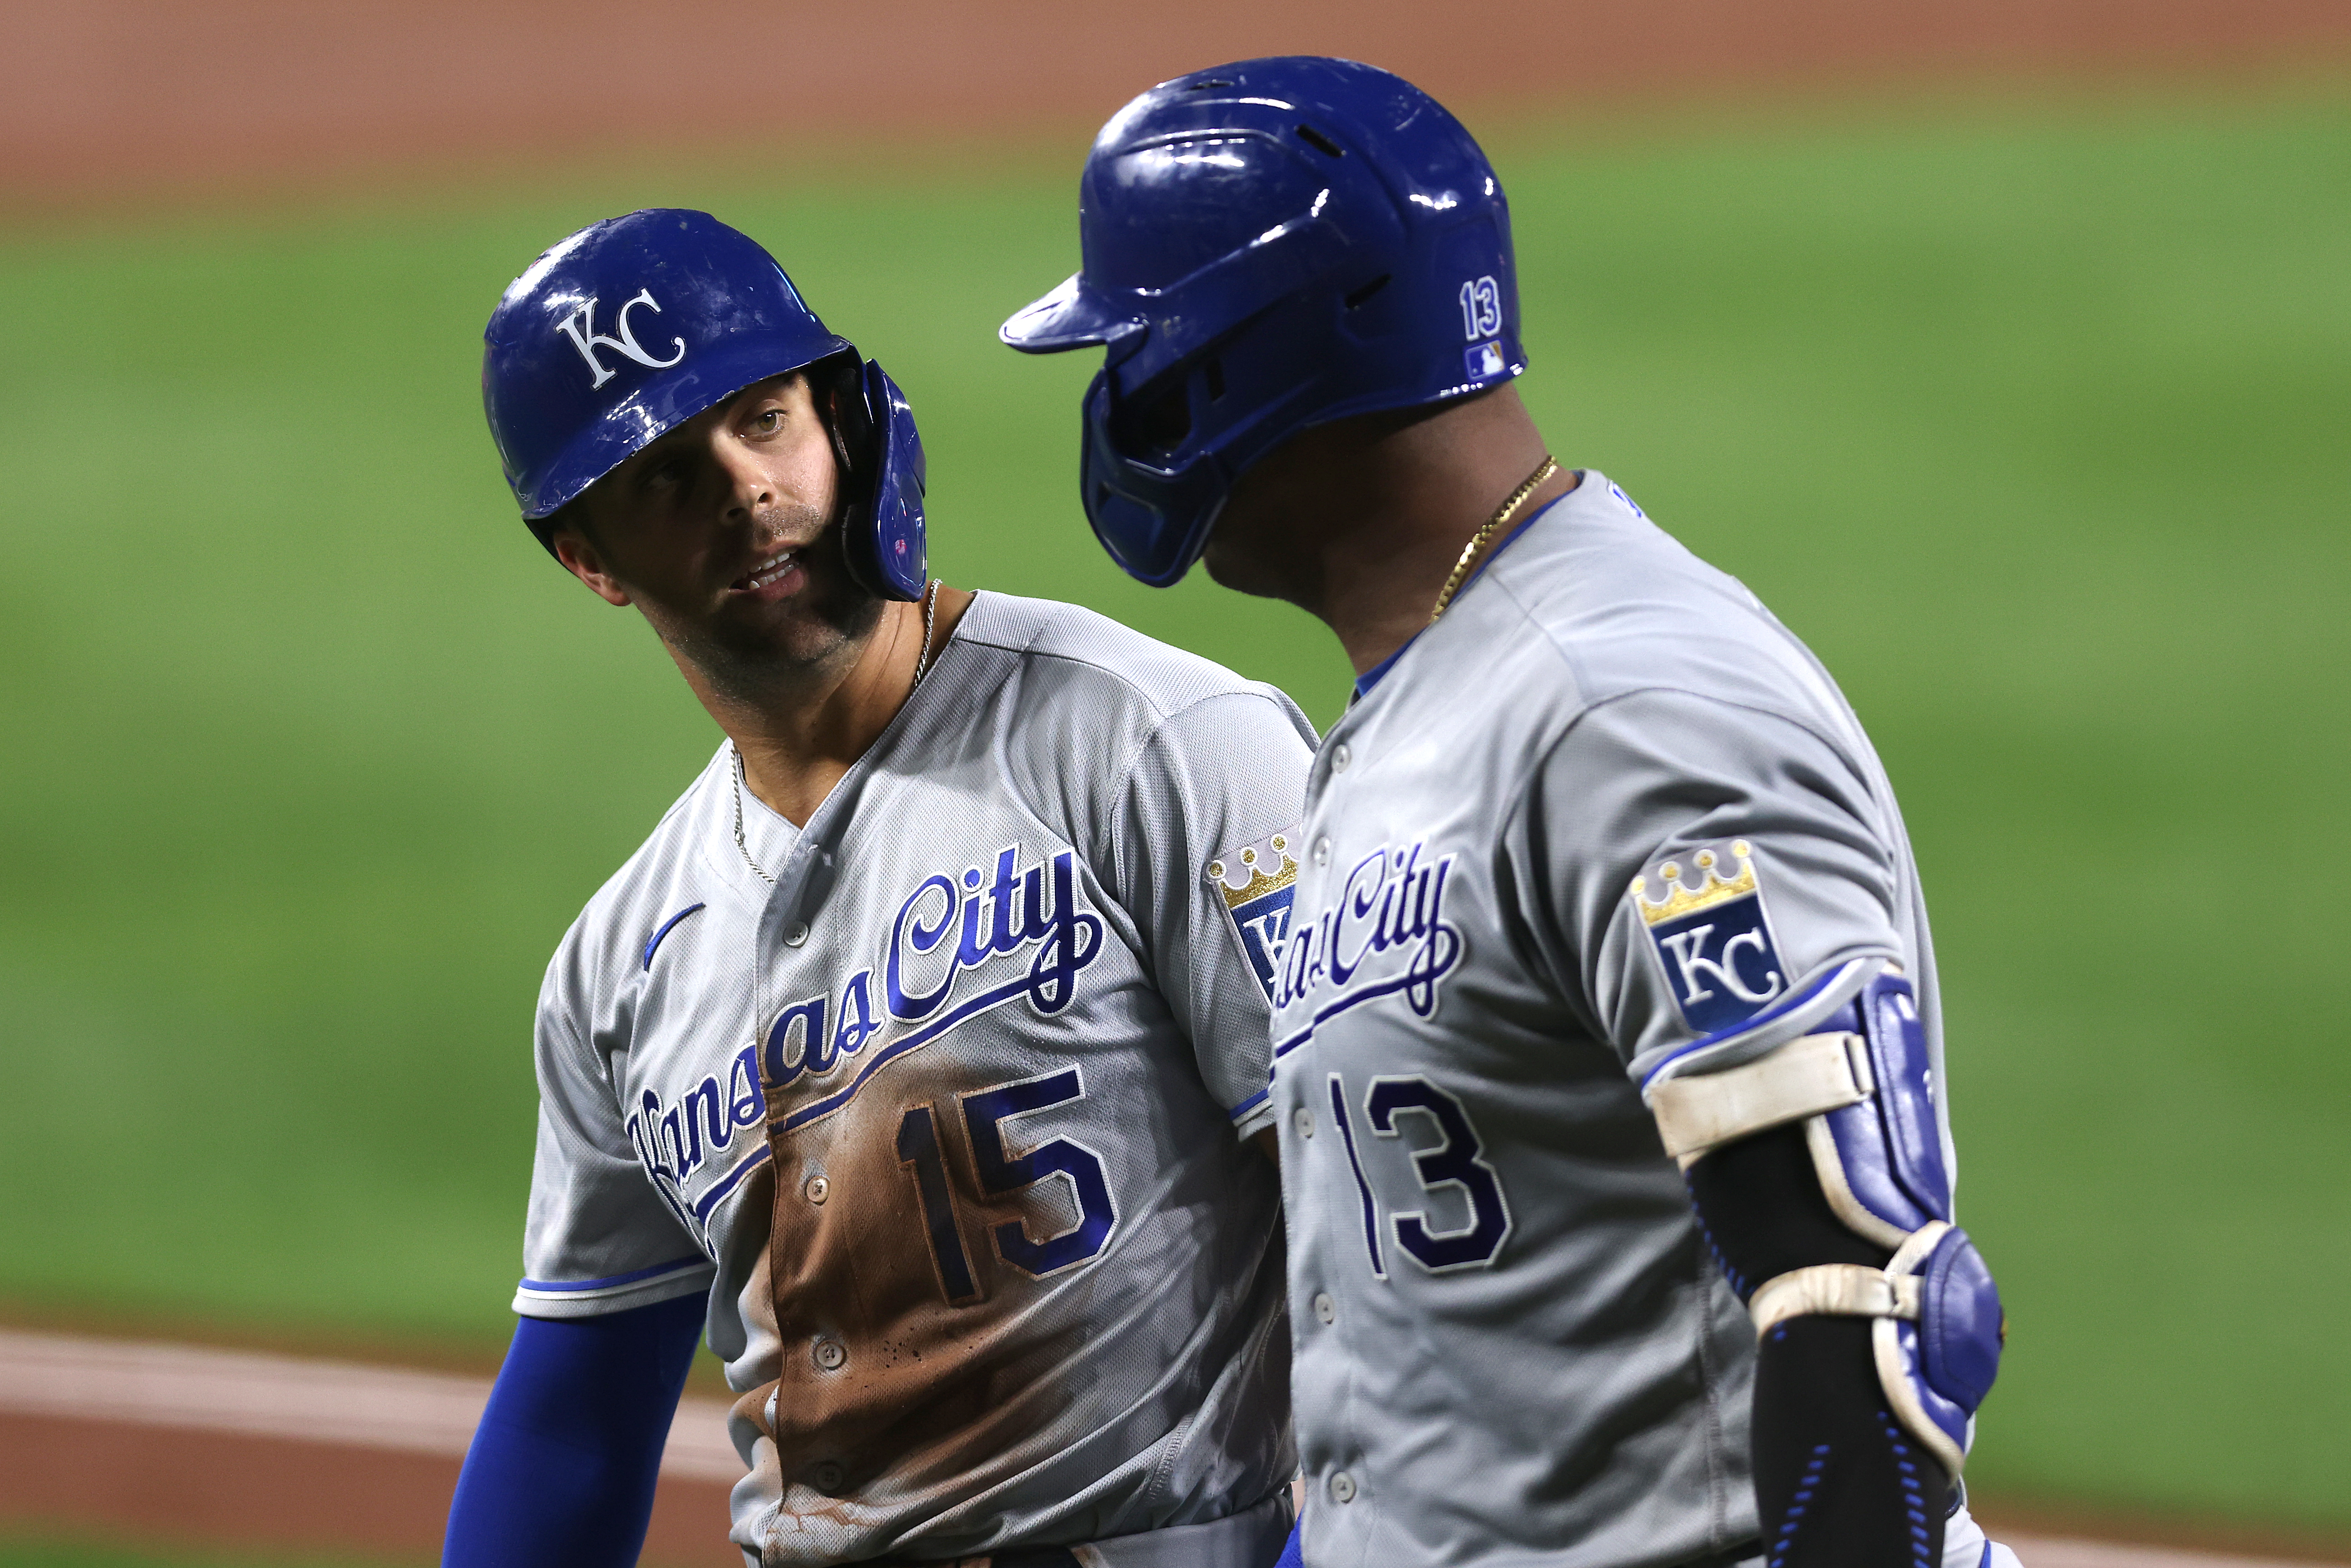 Whit Merrifield #15 talks with Salvador Perez #13 of the Kansas City Royals after scoring a run in the third inning against the Baltimore Orioles at Oriole Park at Camden Yards on September 08, 2021 in Baltimore, Maryland.